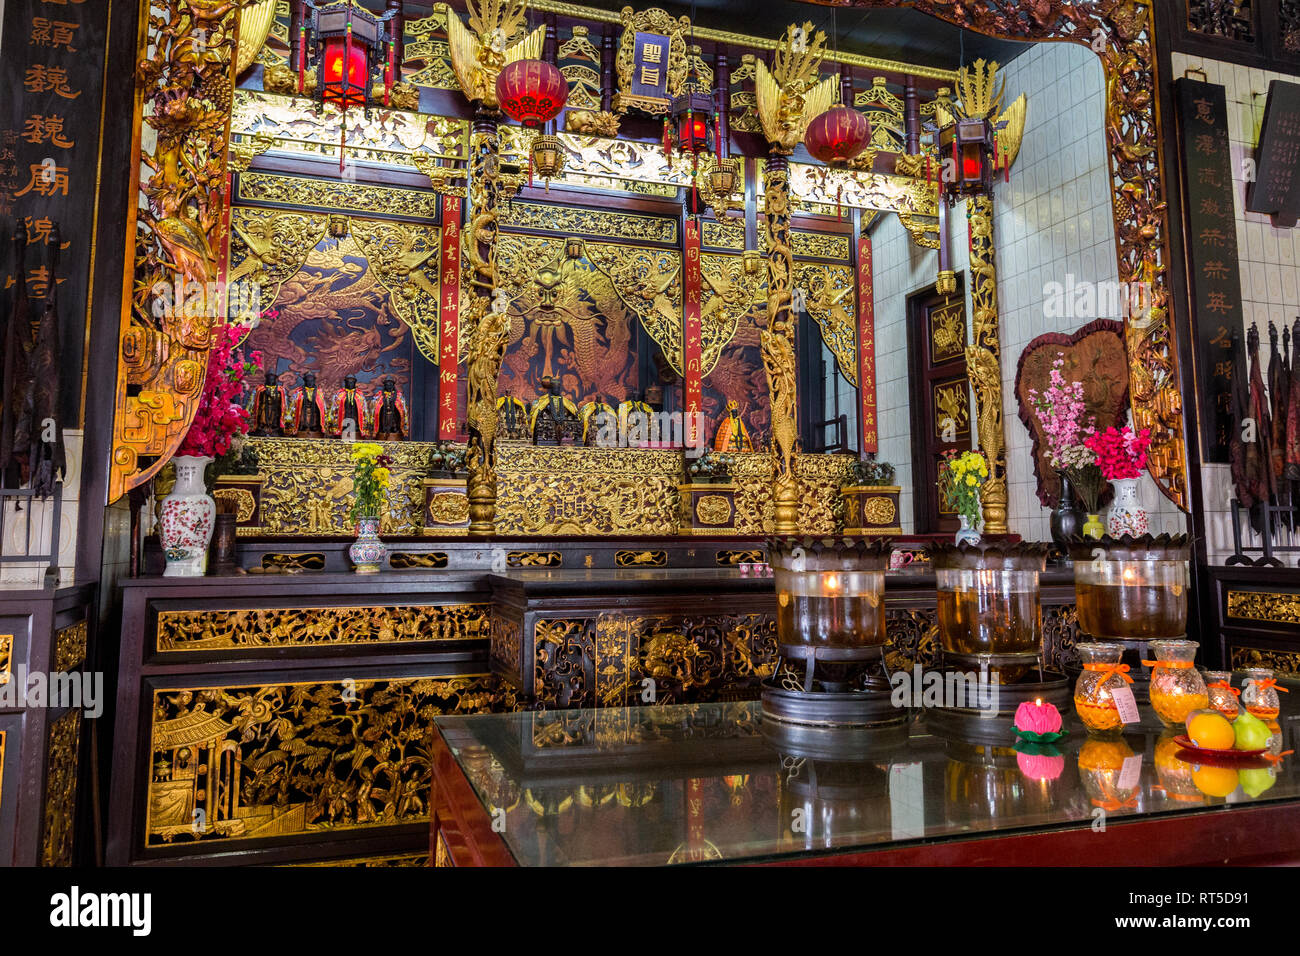 George Town, Penang, Malaysia.  Prayer Hall, Altar, and Deities, Yap Ancestral Temple, Choo Chay Keong. Stock Photo